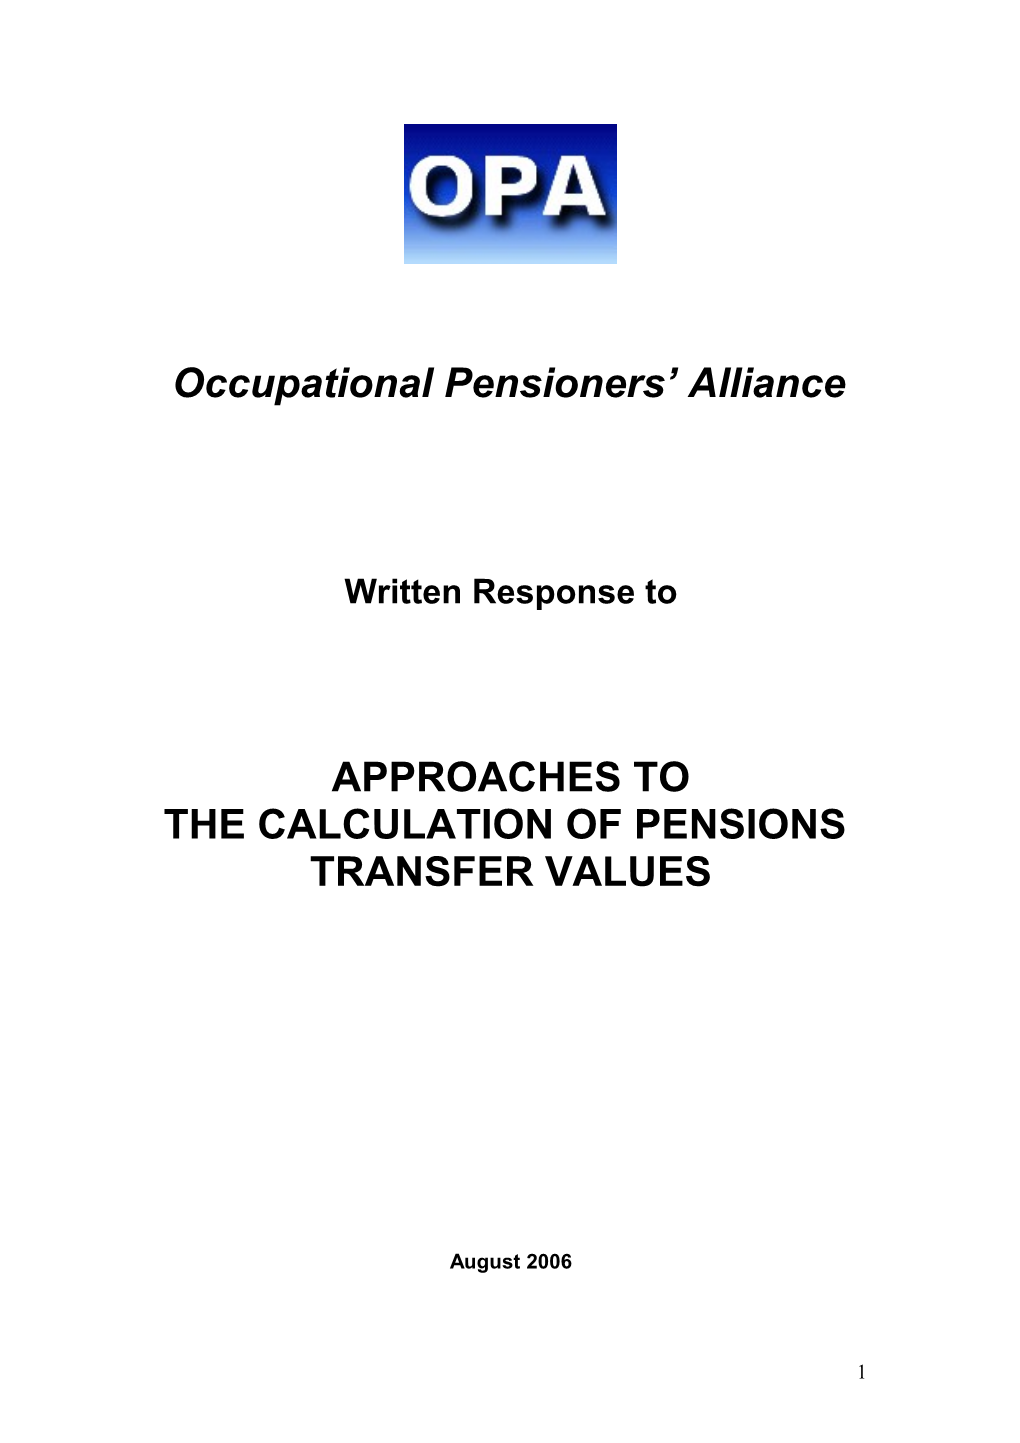 Approaches to Calculation of Pensions Transfer Values